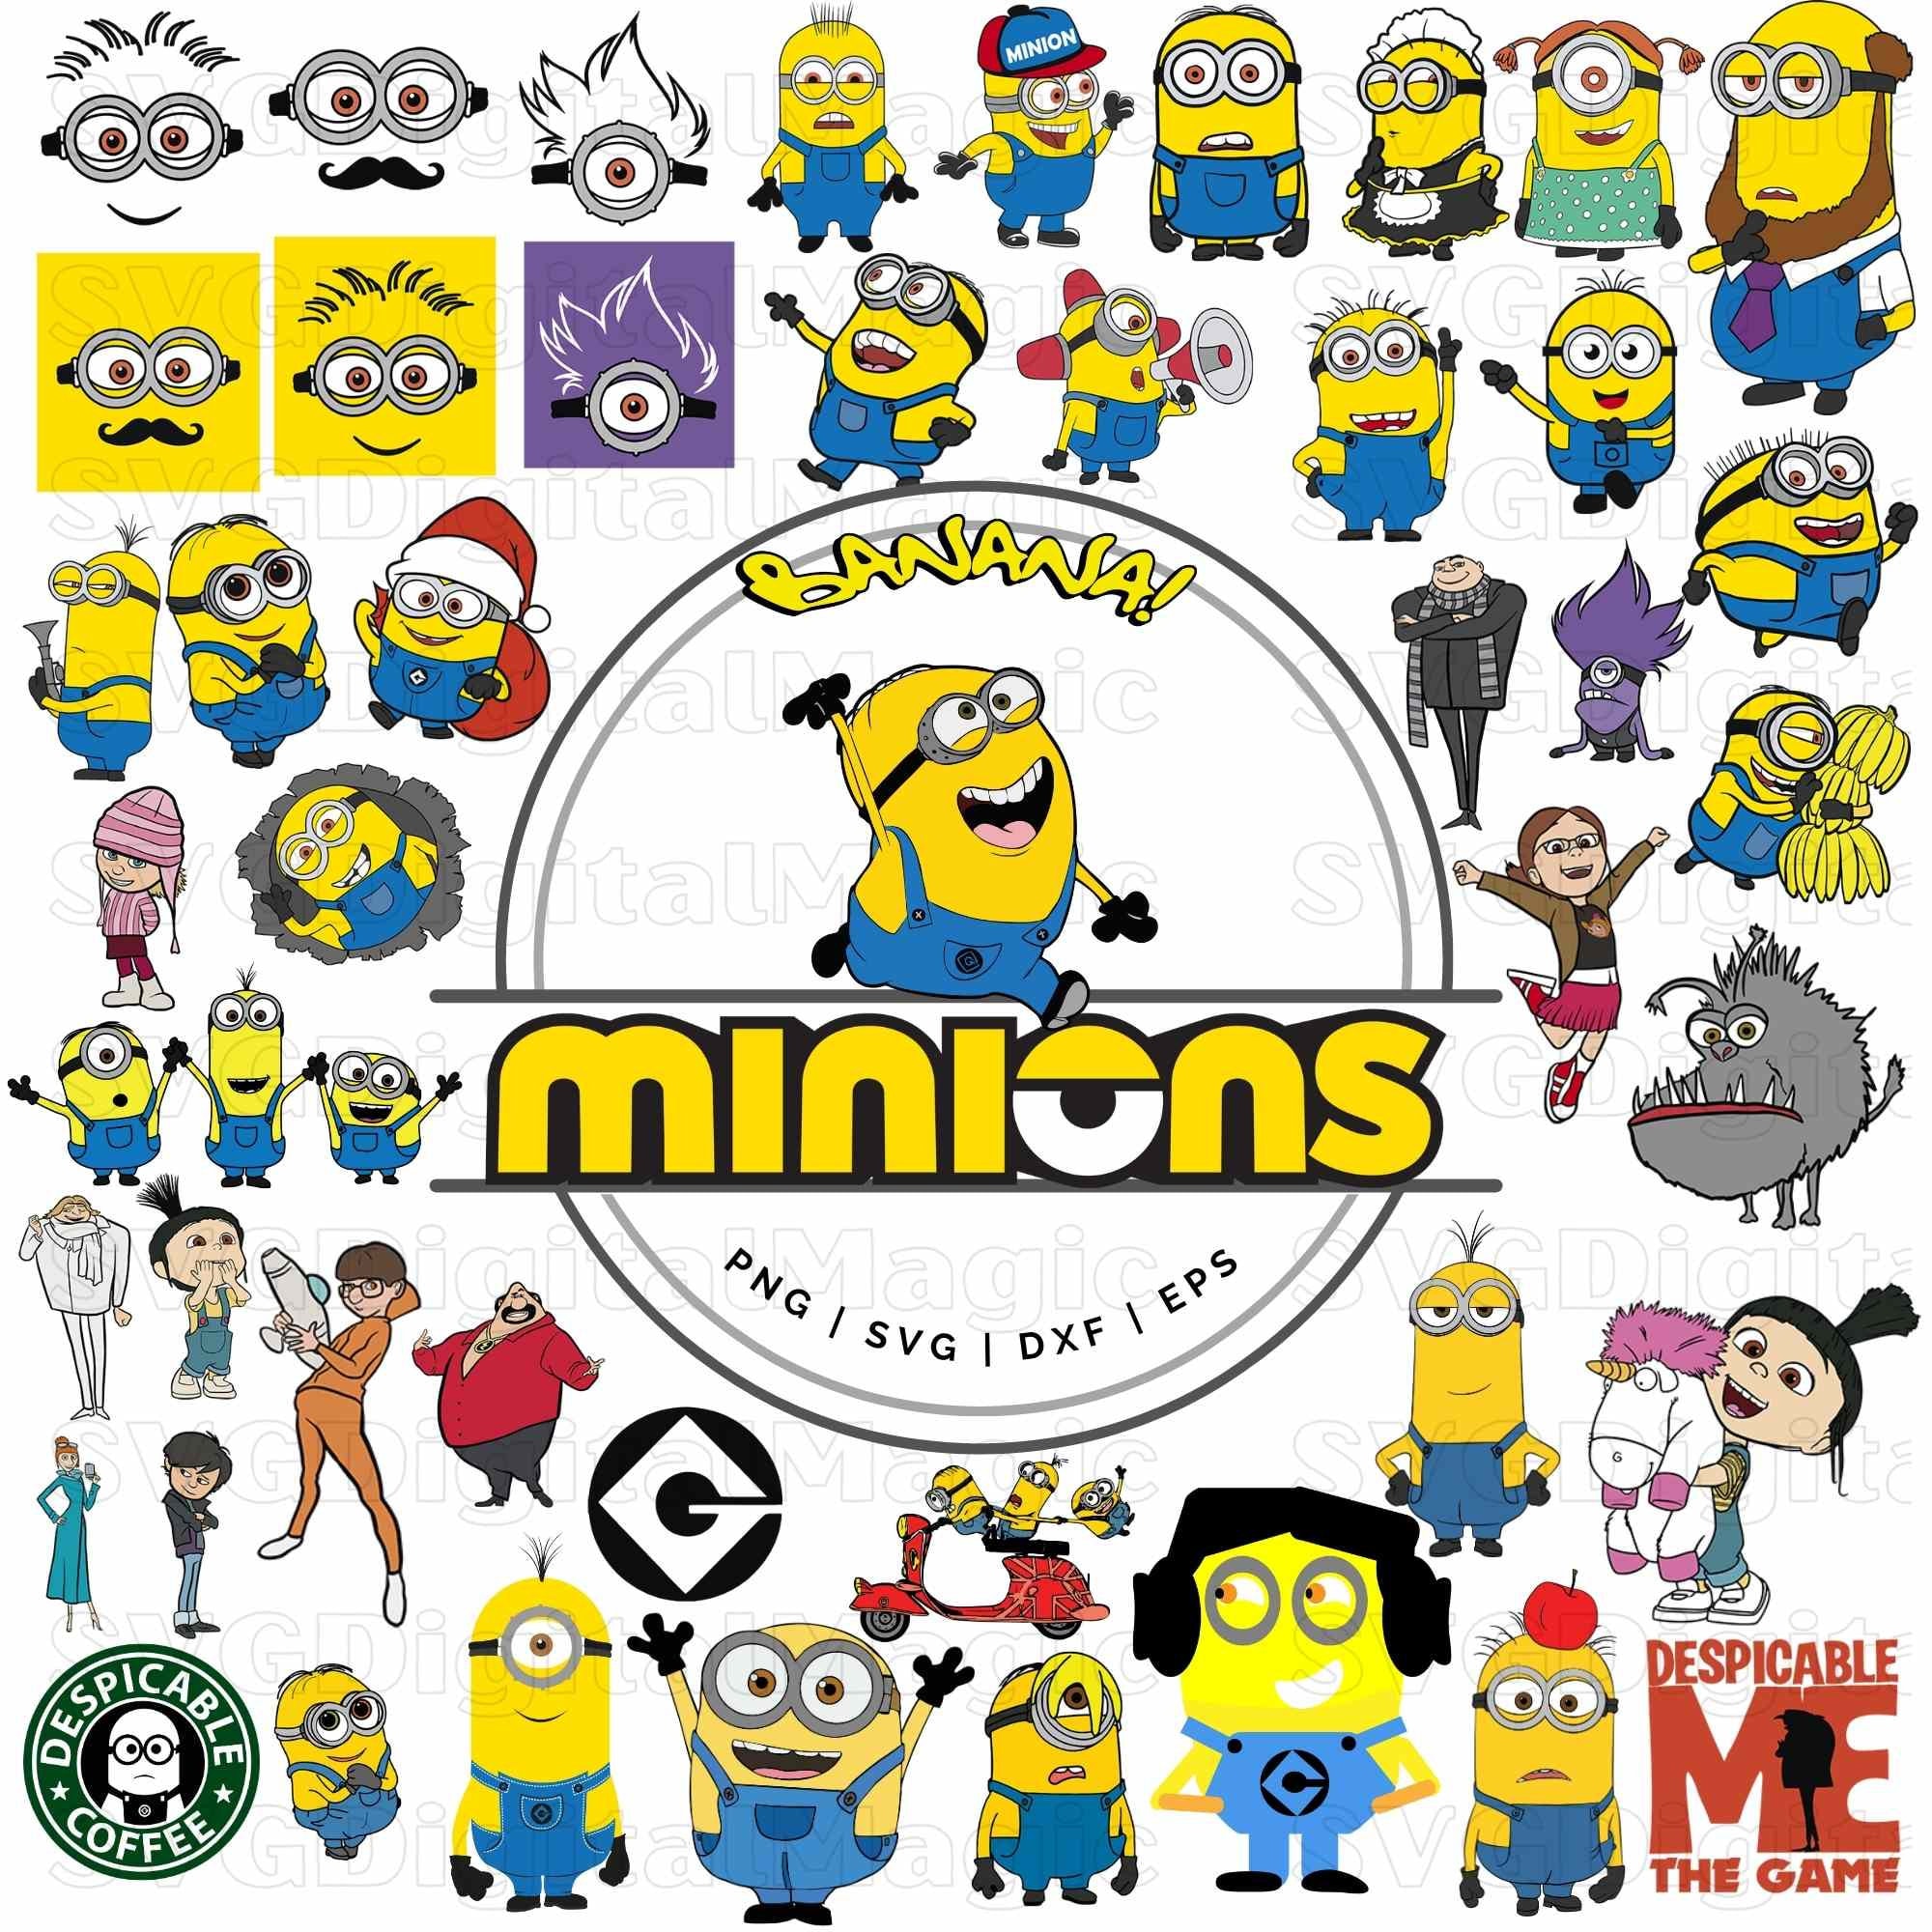  Despicable Me Minions Stickers and Tattoos Party Favors Bundle  ~ 75 Minions Temporary Tattoos and 100 Minions Stickers for Kids (Minions  Party Favors) : Toys & Games